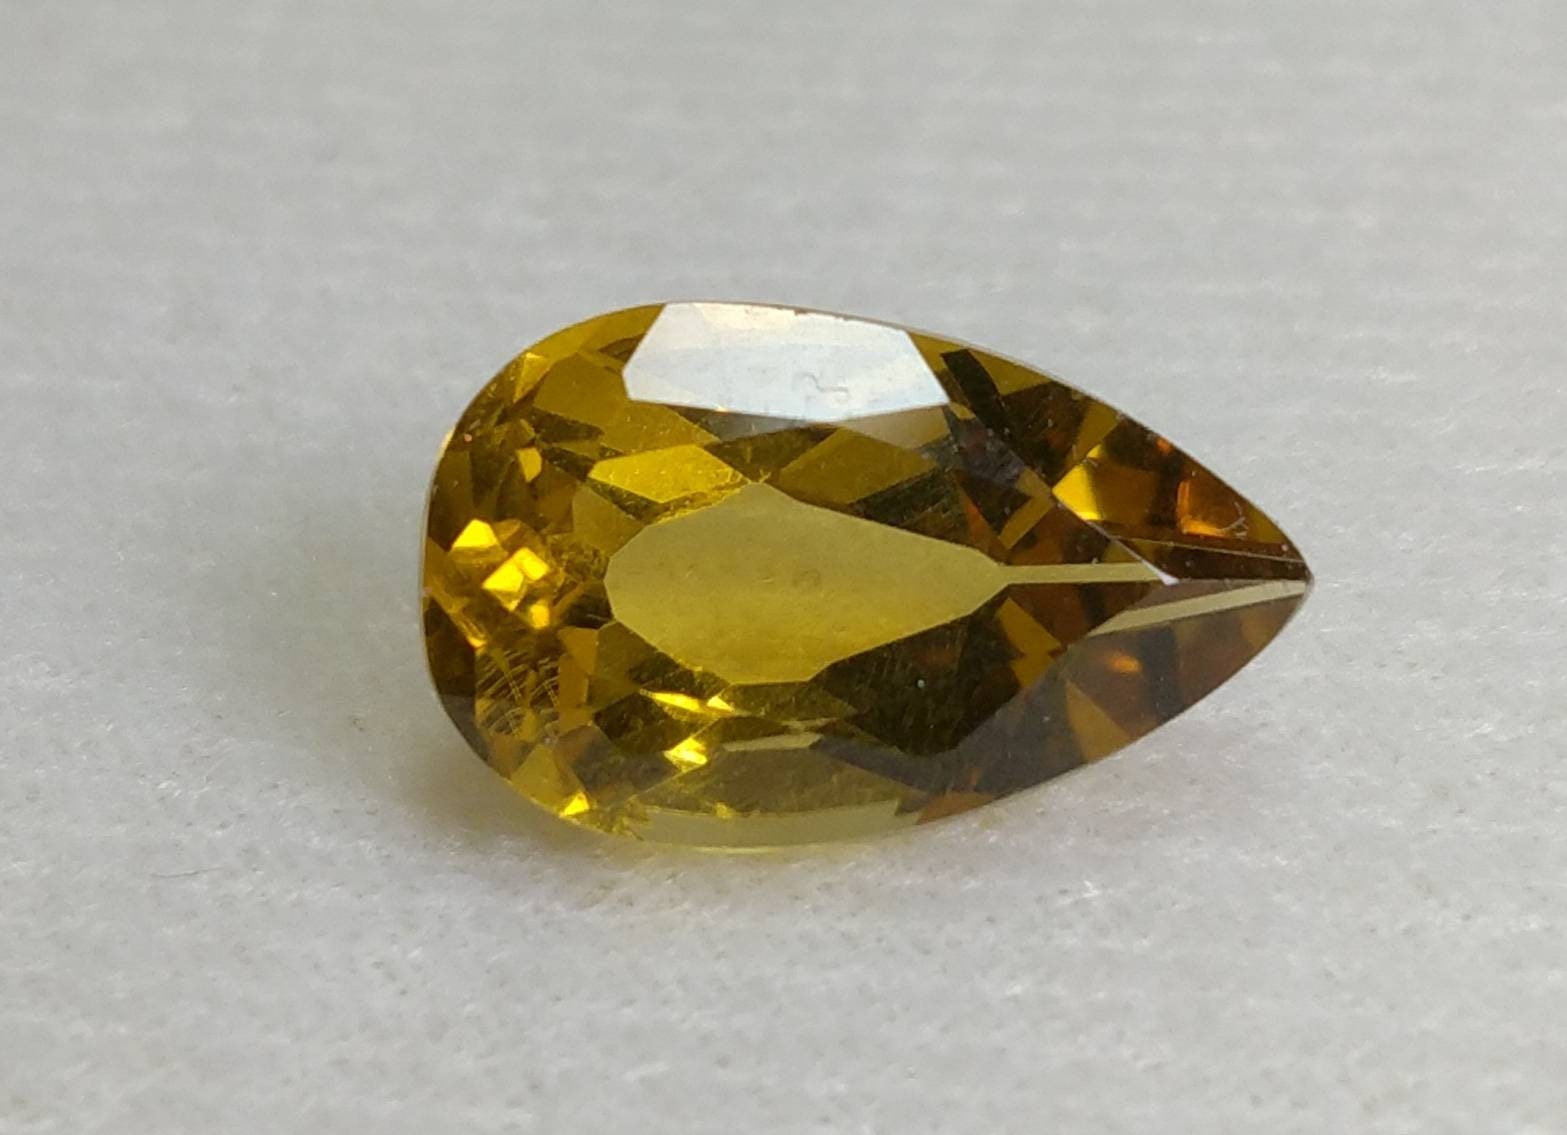 ARSAA GEMS AND MINERALSTop Quality beautiful natural 6.5 carats pear shape VV clarity citrine faceted gem - Premium  from ARSAA GEMS AND MINERALS - Just $30.00! Shop now at ARSAA GEMS AND MINERALS